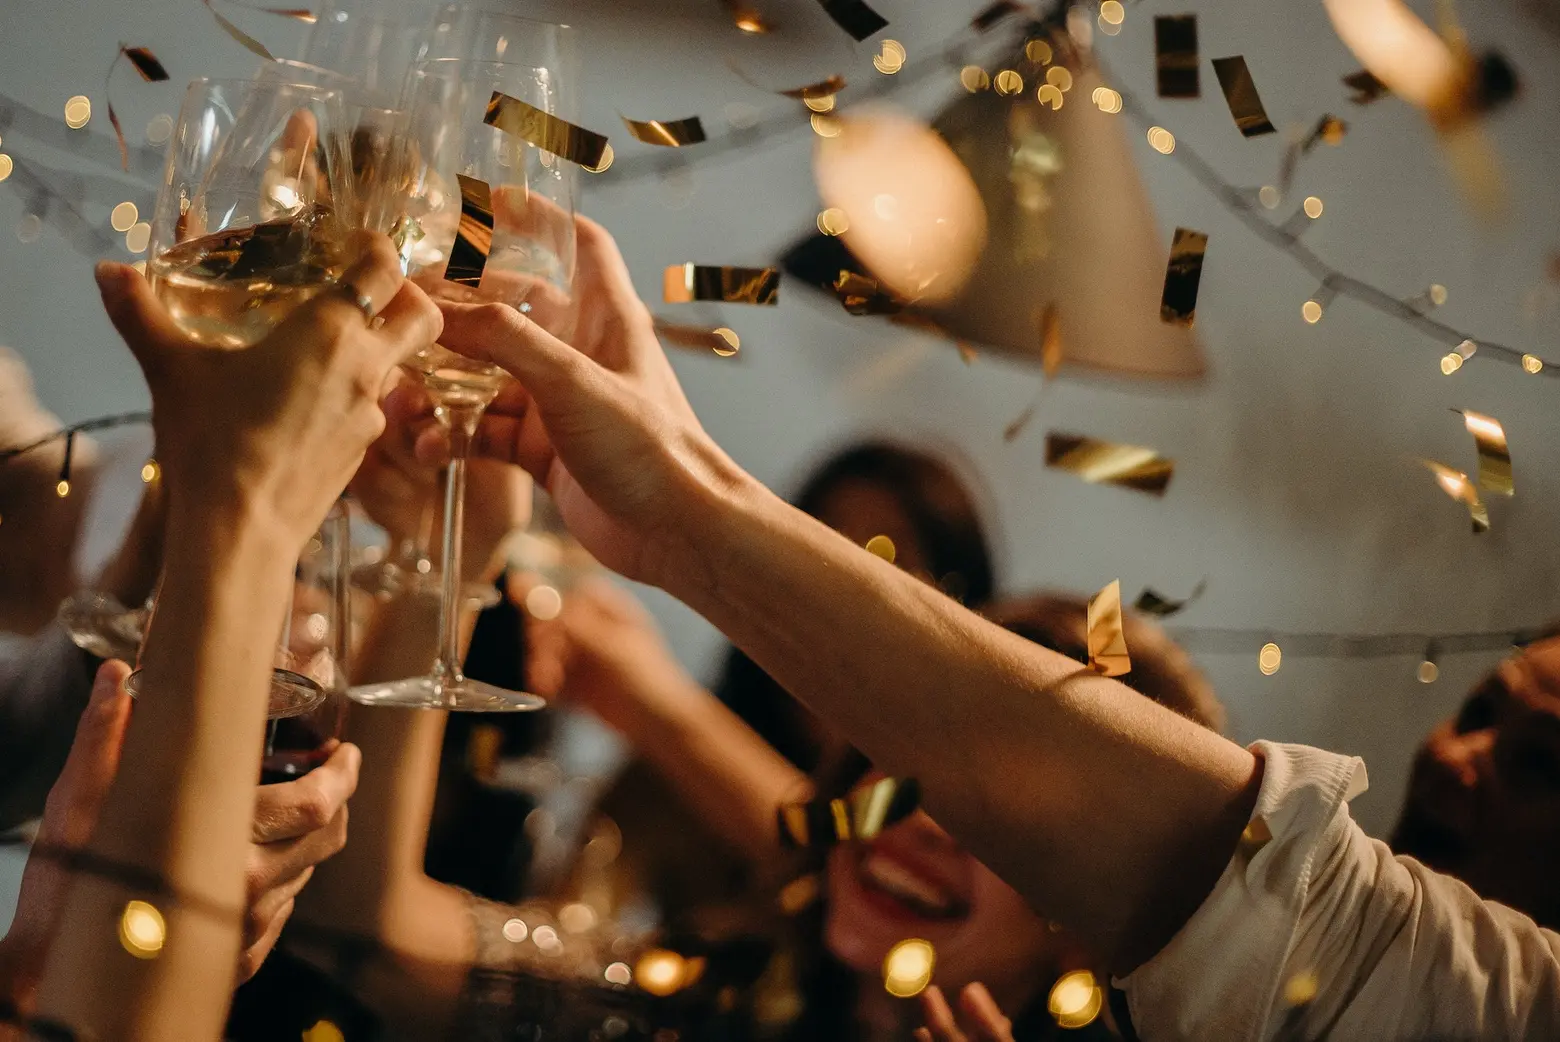 Everything you need to host a NYE party in your NYC apartment